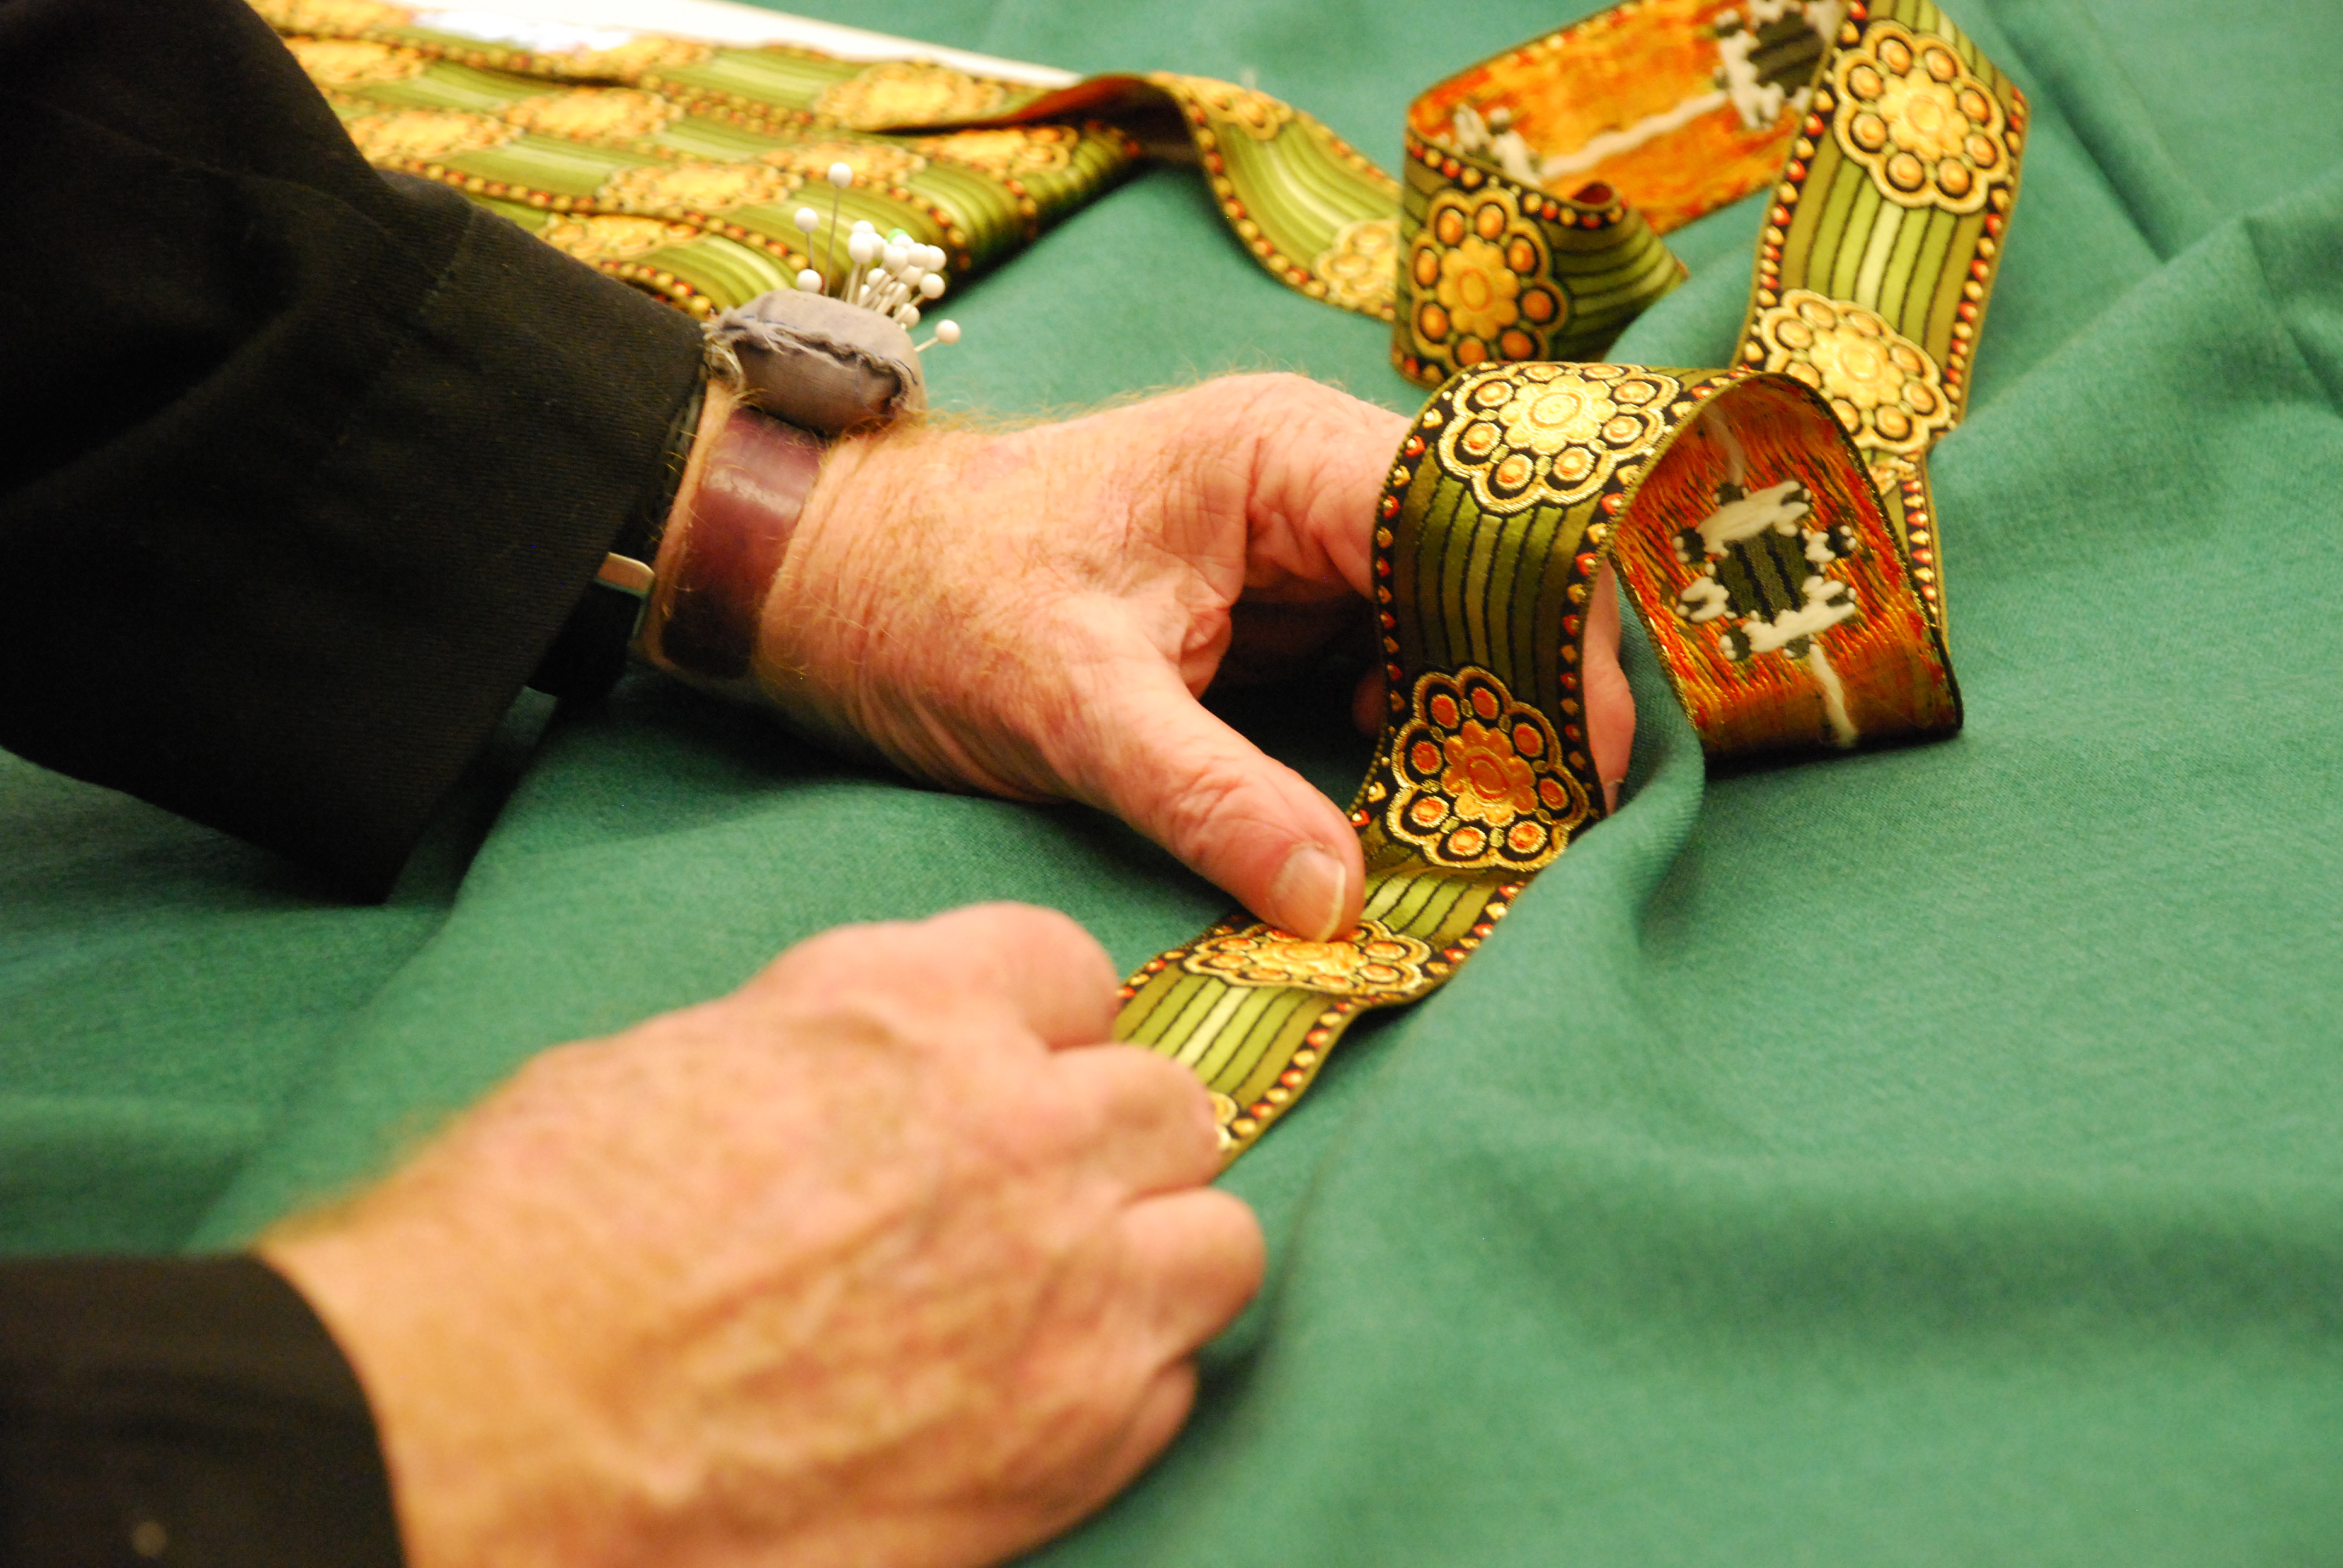 002_2---Creating-Vestments-by-Hand.jpg